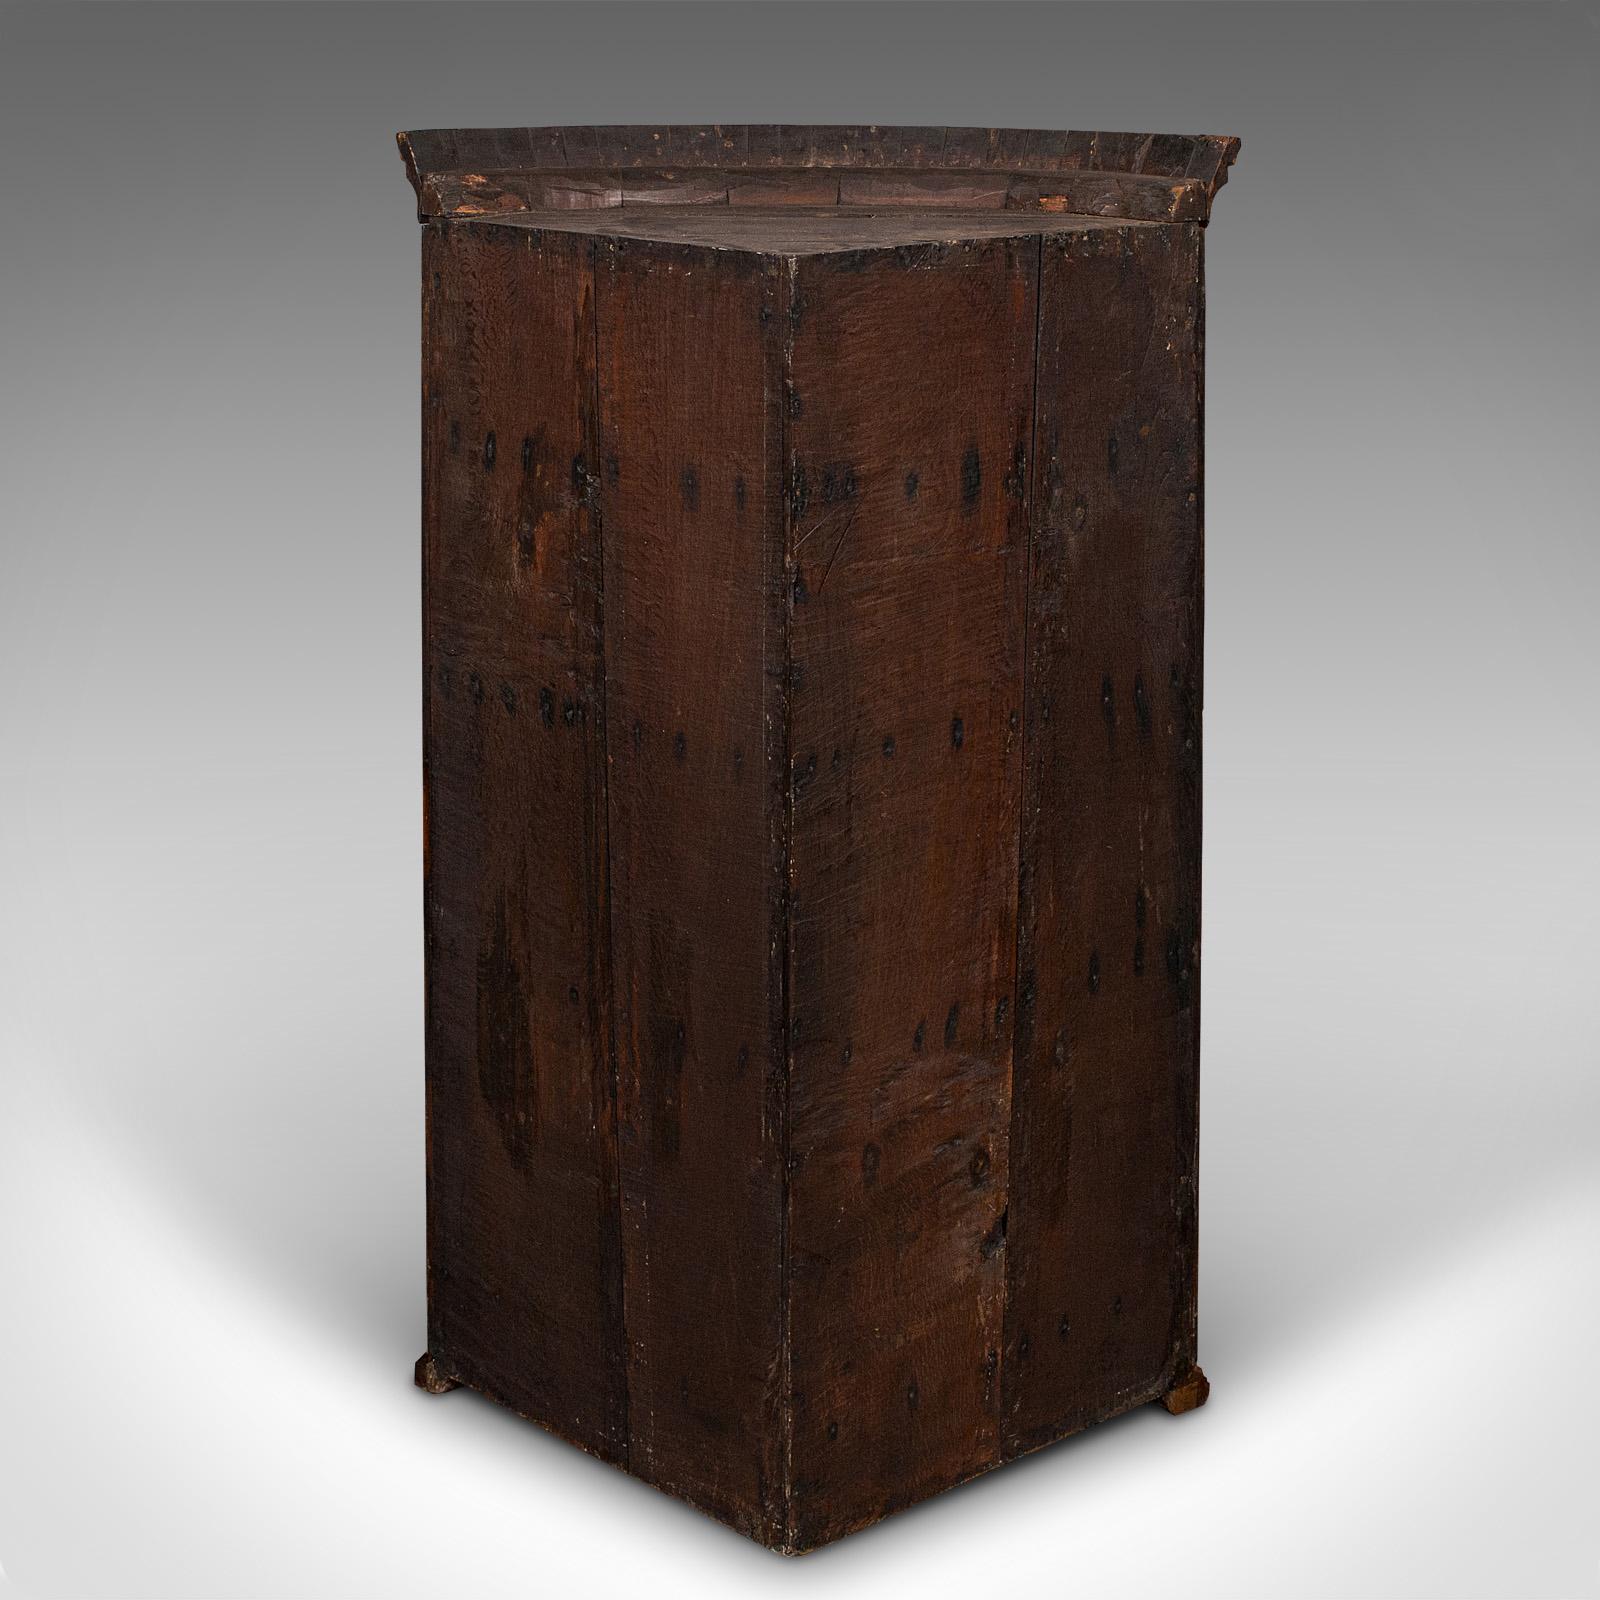 Antique Bow Front Corner Cabinet, English, Wall Cupboard, Georgian, circa 1770 In Good Condition For Sale In Hele, Devon, GB